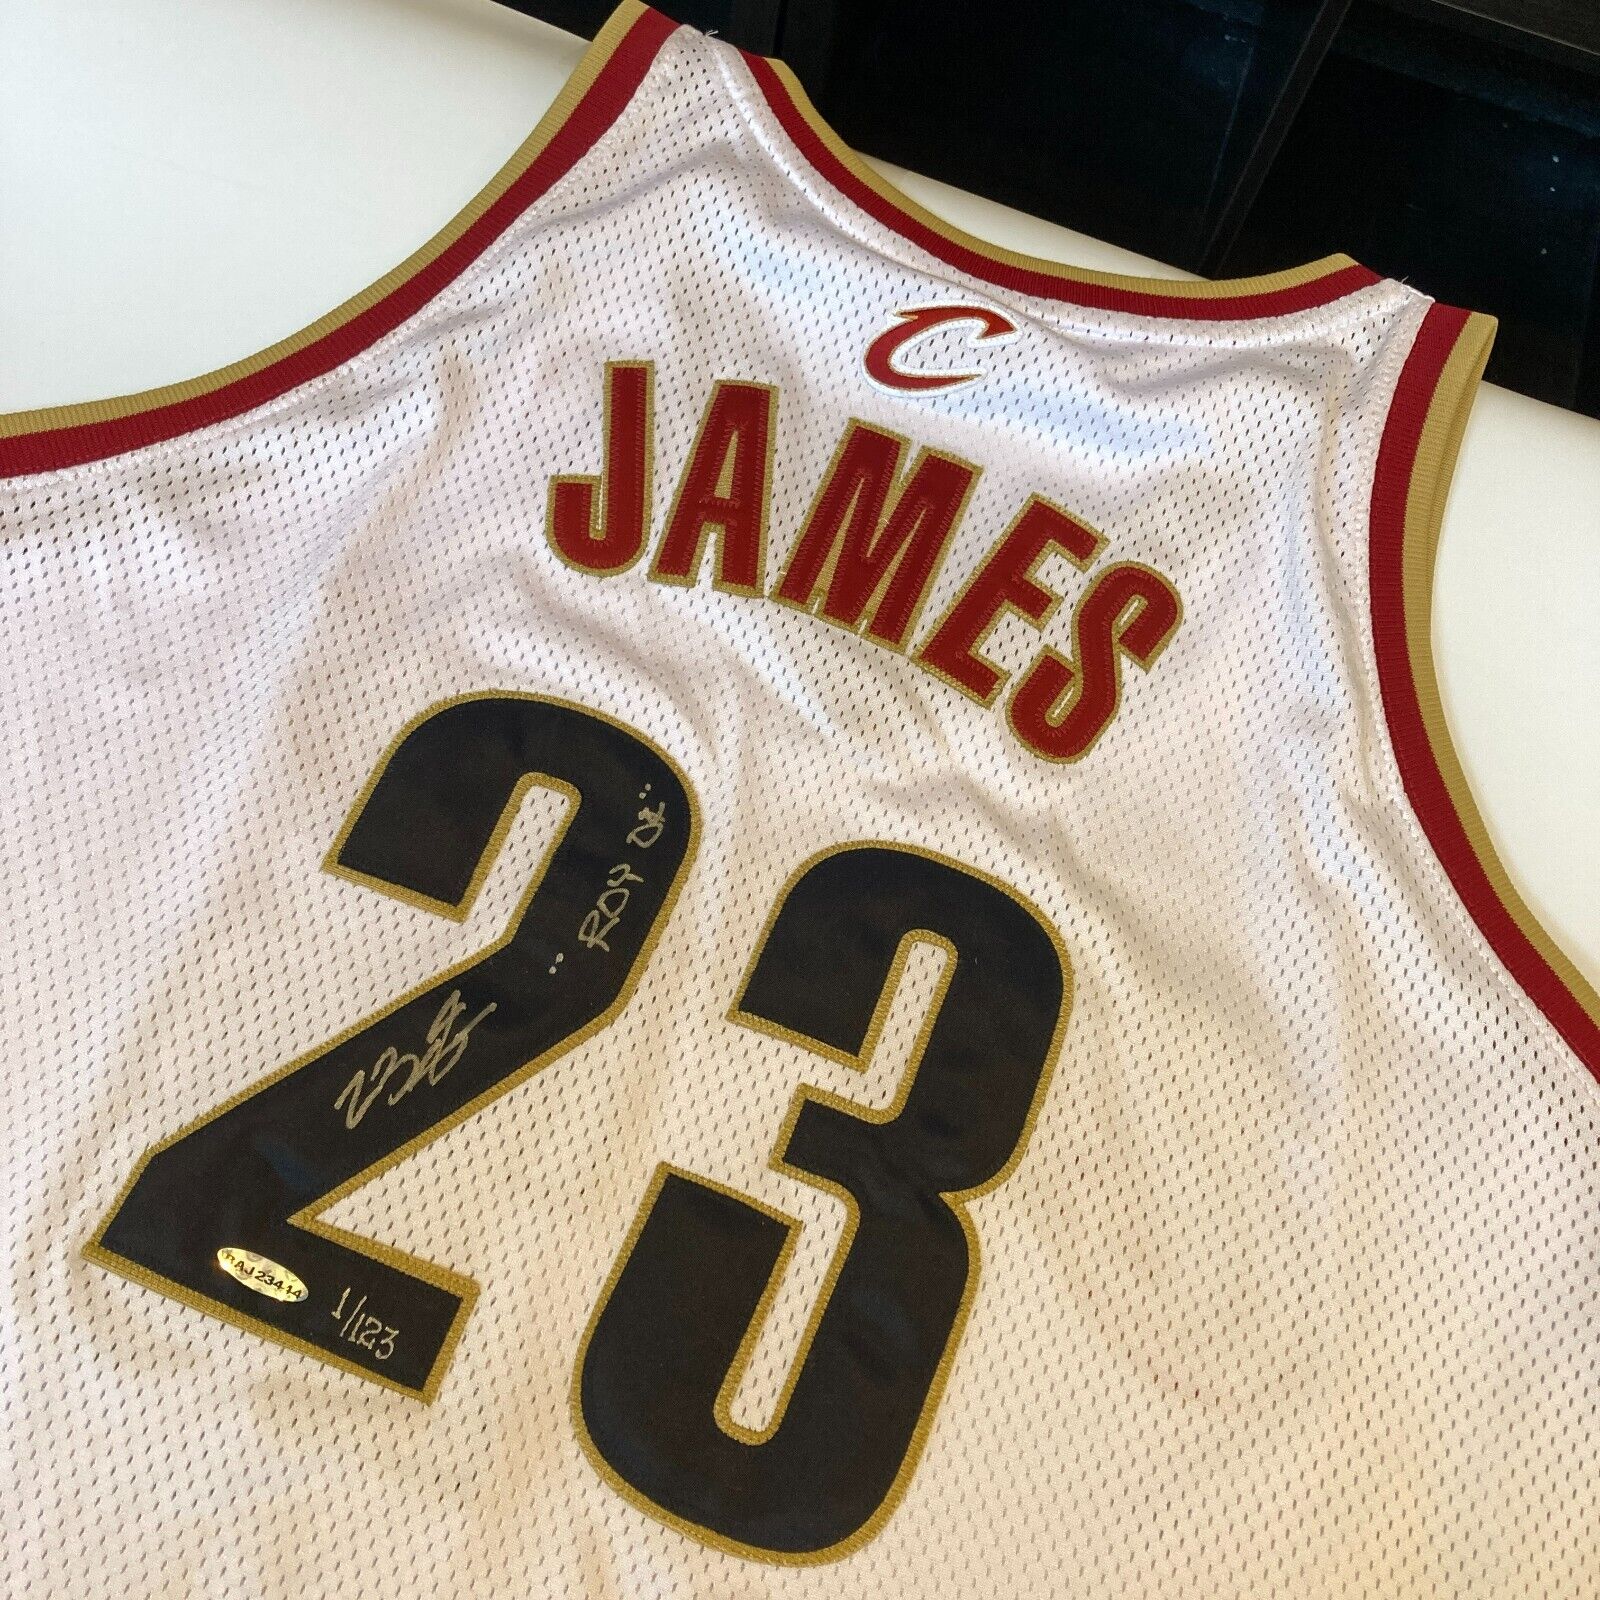 LeBron James Signed LE Cavaliers Career Highlight Jersey Inscribed ROY 04  (UDA COA)